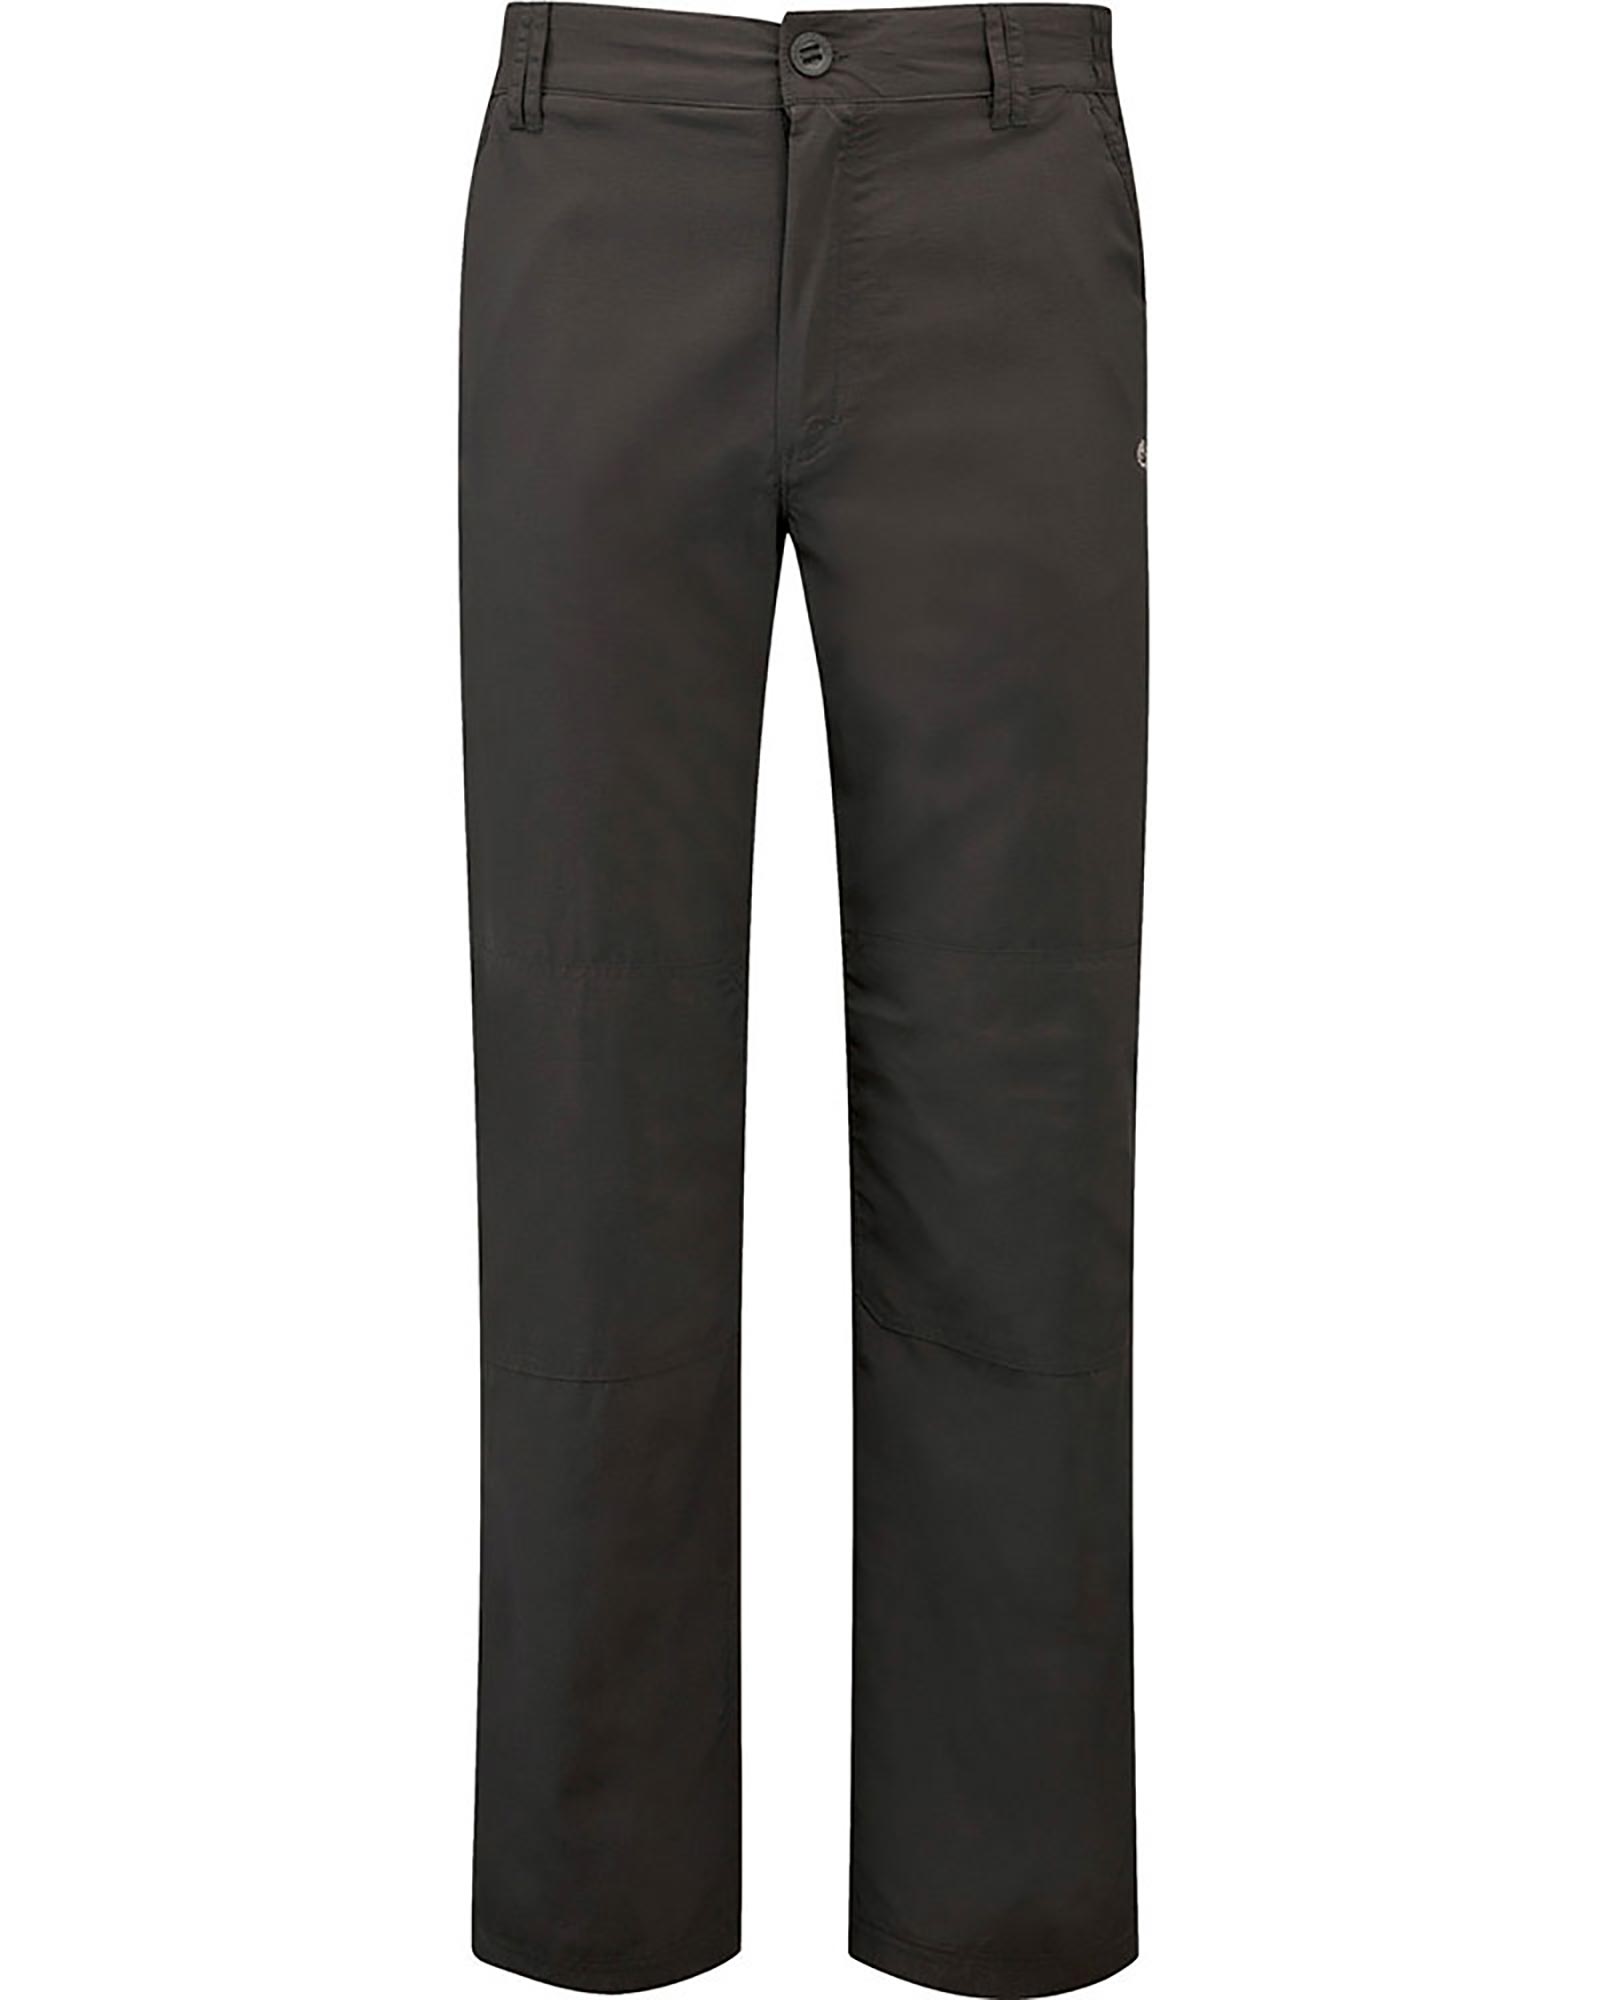 Craghoppers Nosilife Lite Mens Trousers